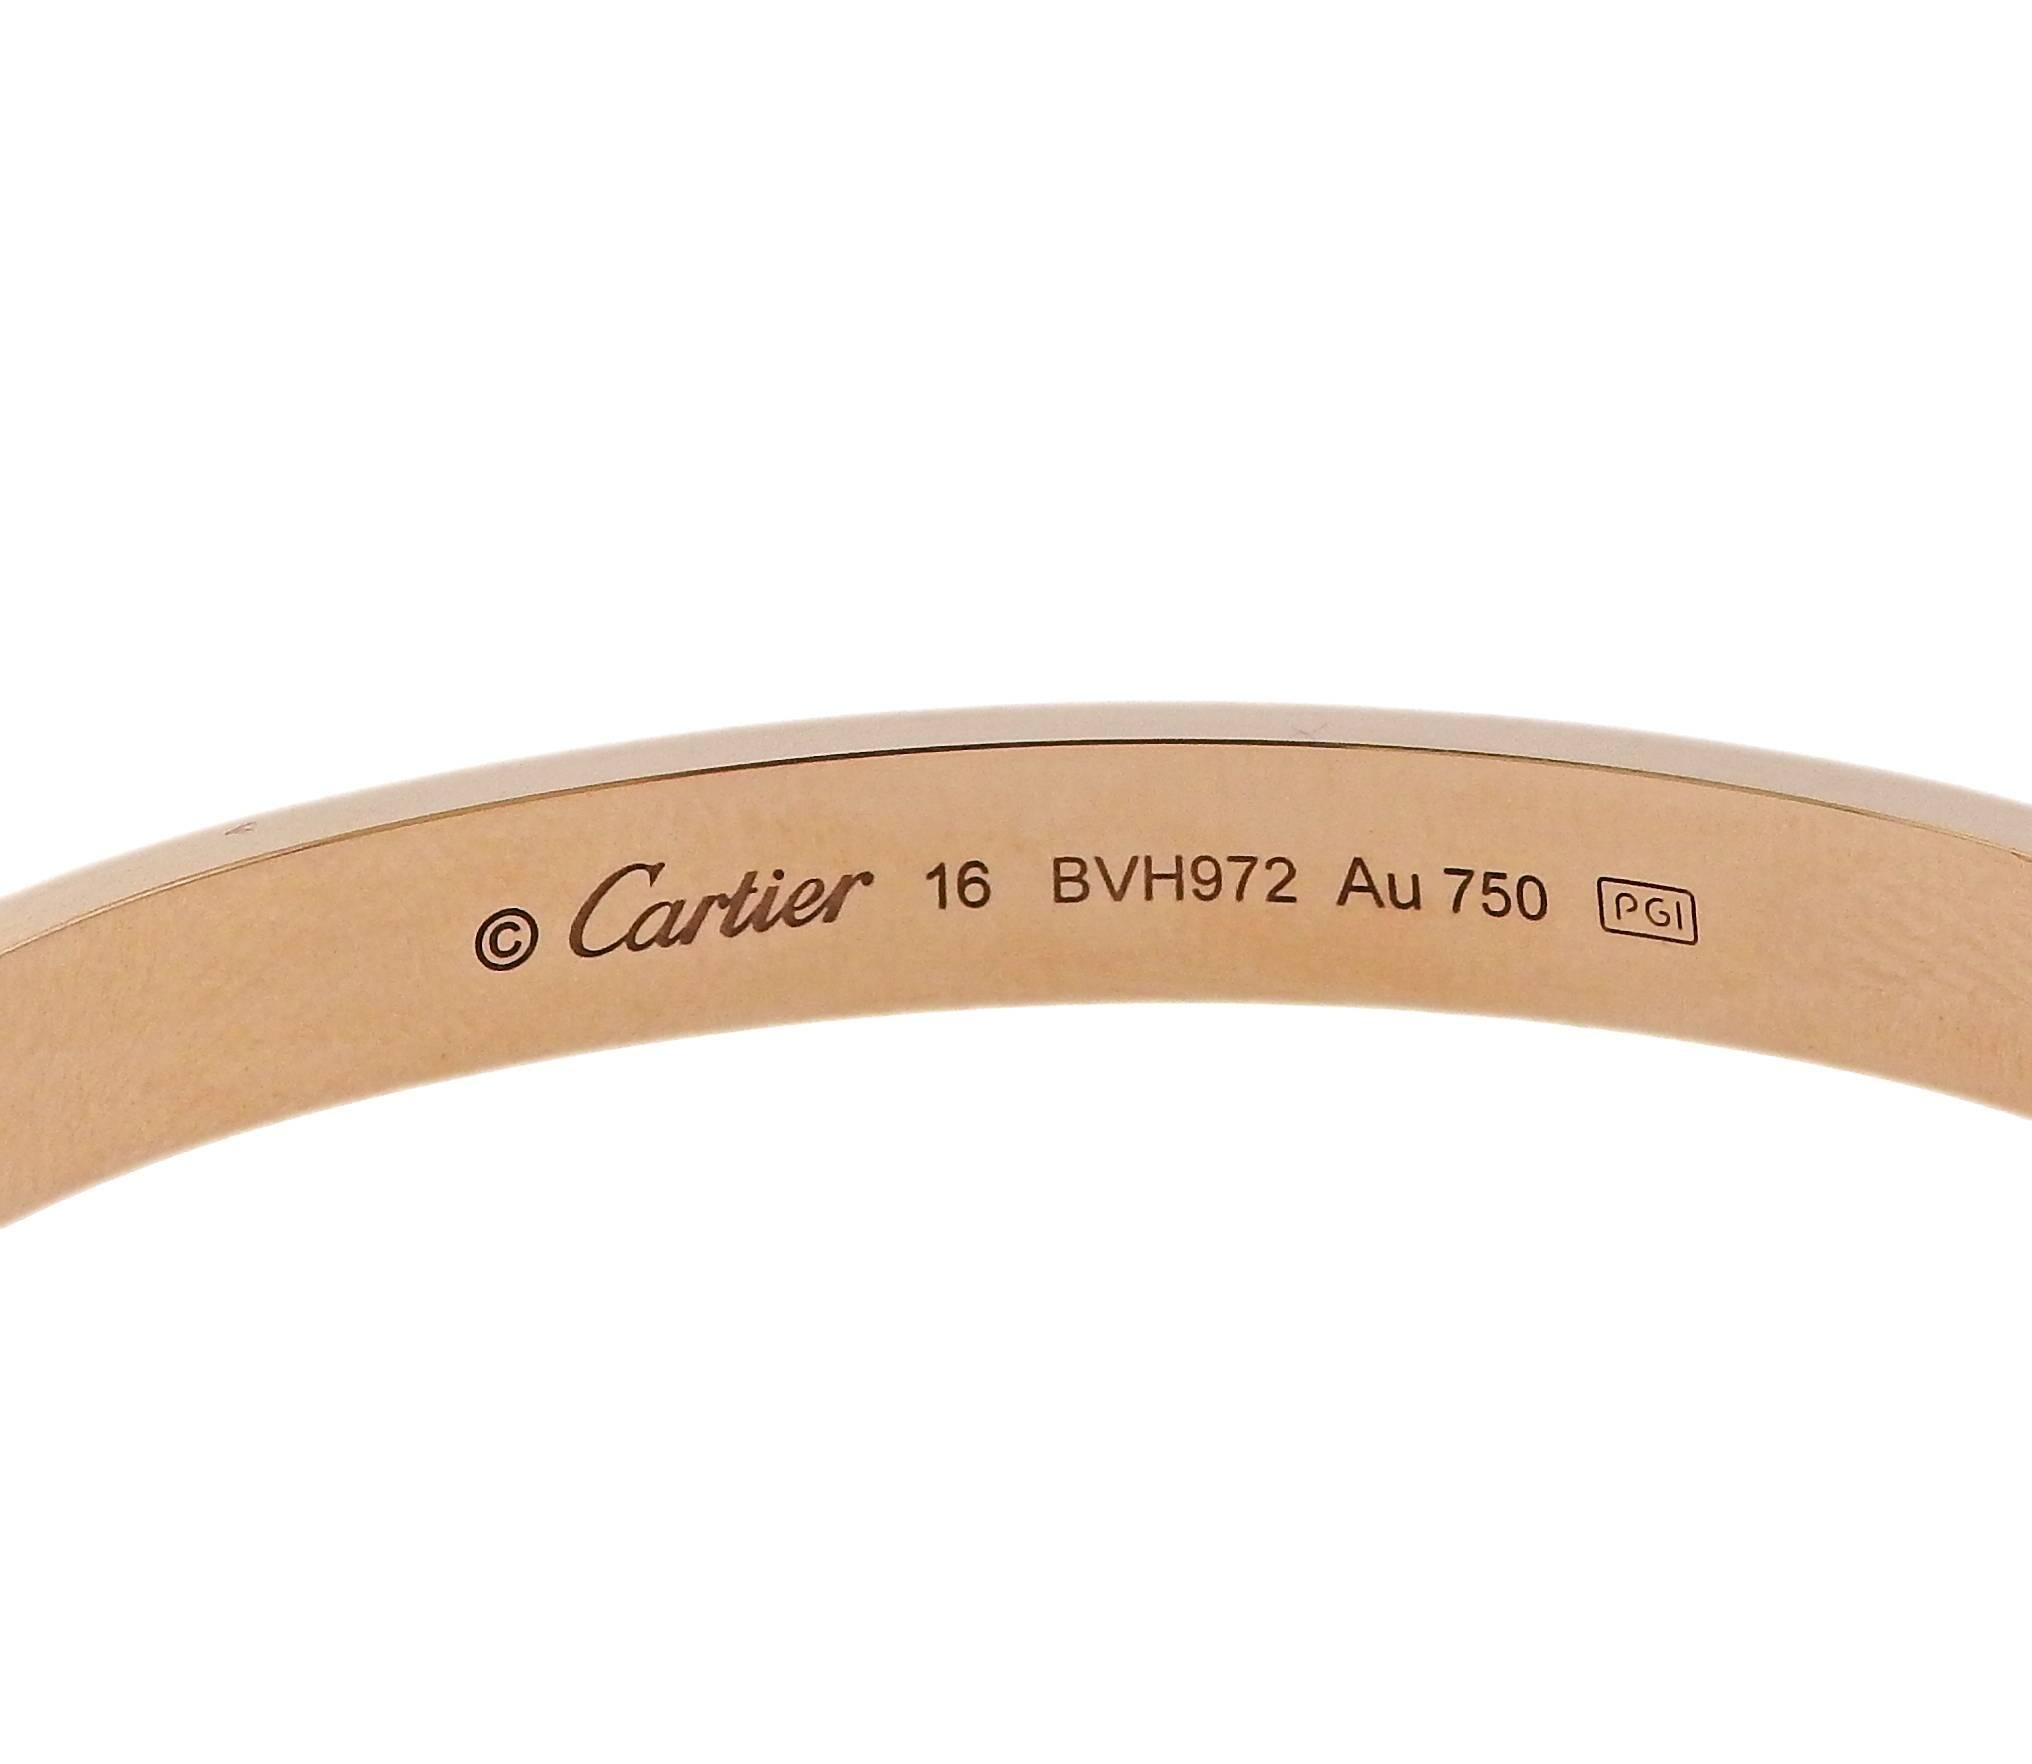 An 18k rose gold bangle bracelet crafted by Cartier for the Love collection. Bracelet is a size 16, interior dimensions are 1 11/16" x 2 1/8" , bracelet is 6.2mm wide. Marked Cartier, 16, BVH972, Au 750,  PGI. Weight is 30.1 grams. Comes